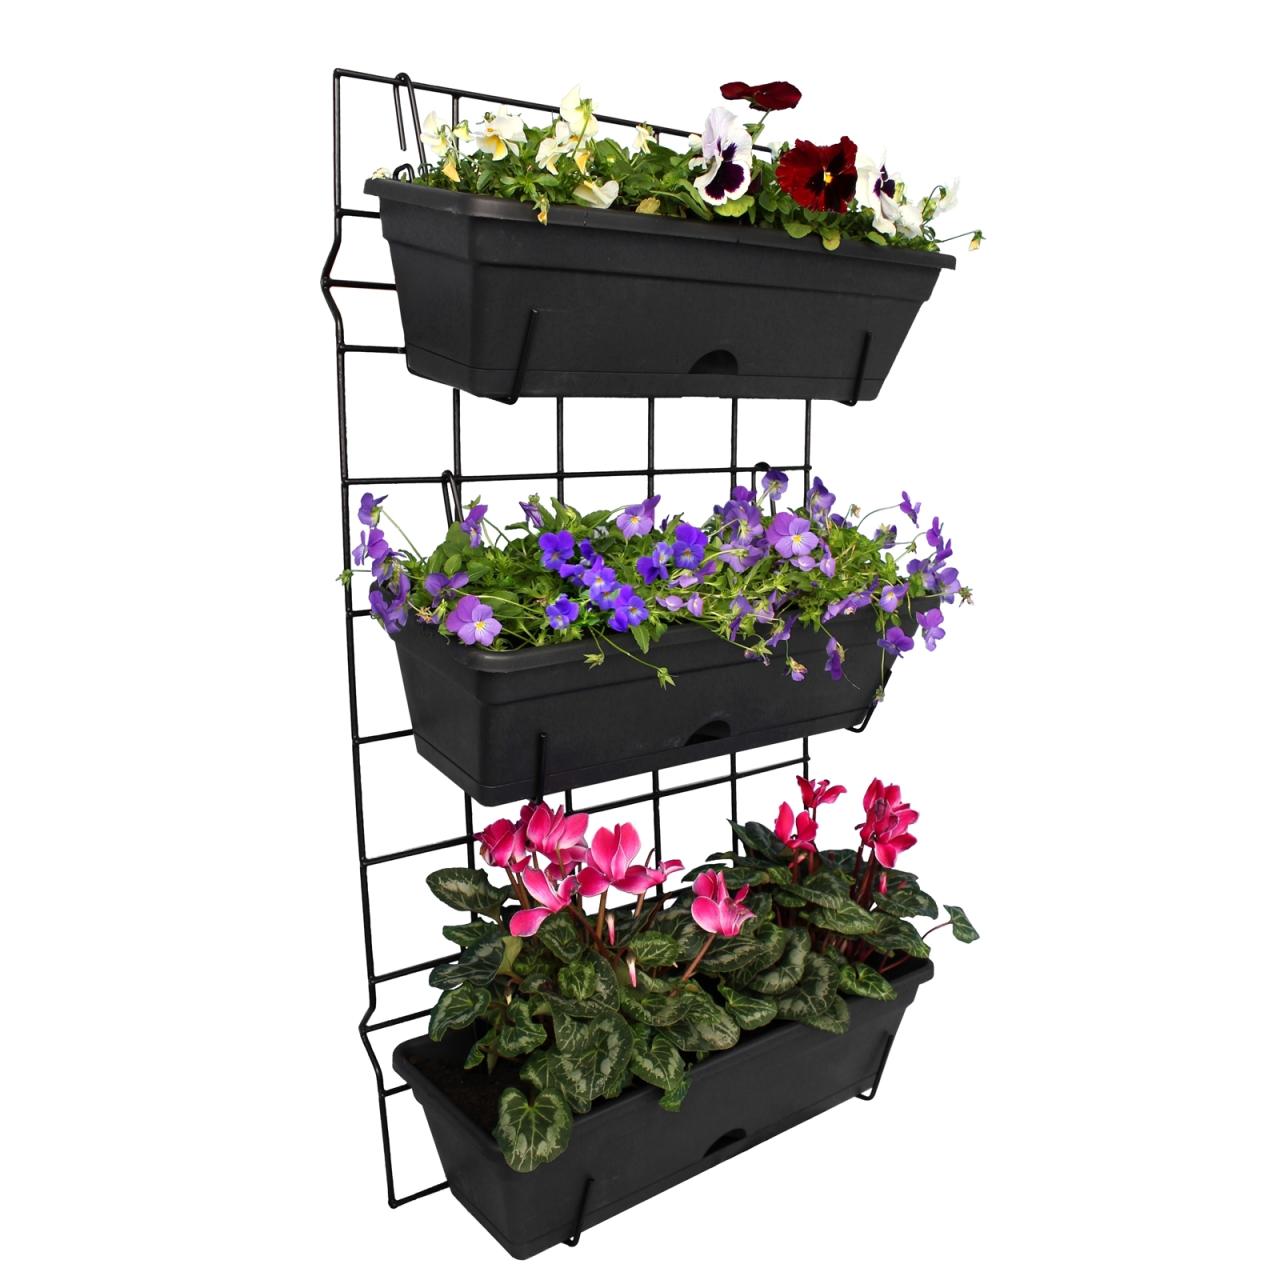 Hanging Plants Indoor | Hanging Wall Pots from Bunnings: Enhancing Your Home Decor with Style and Functionality